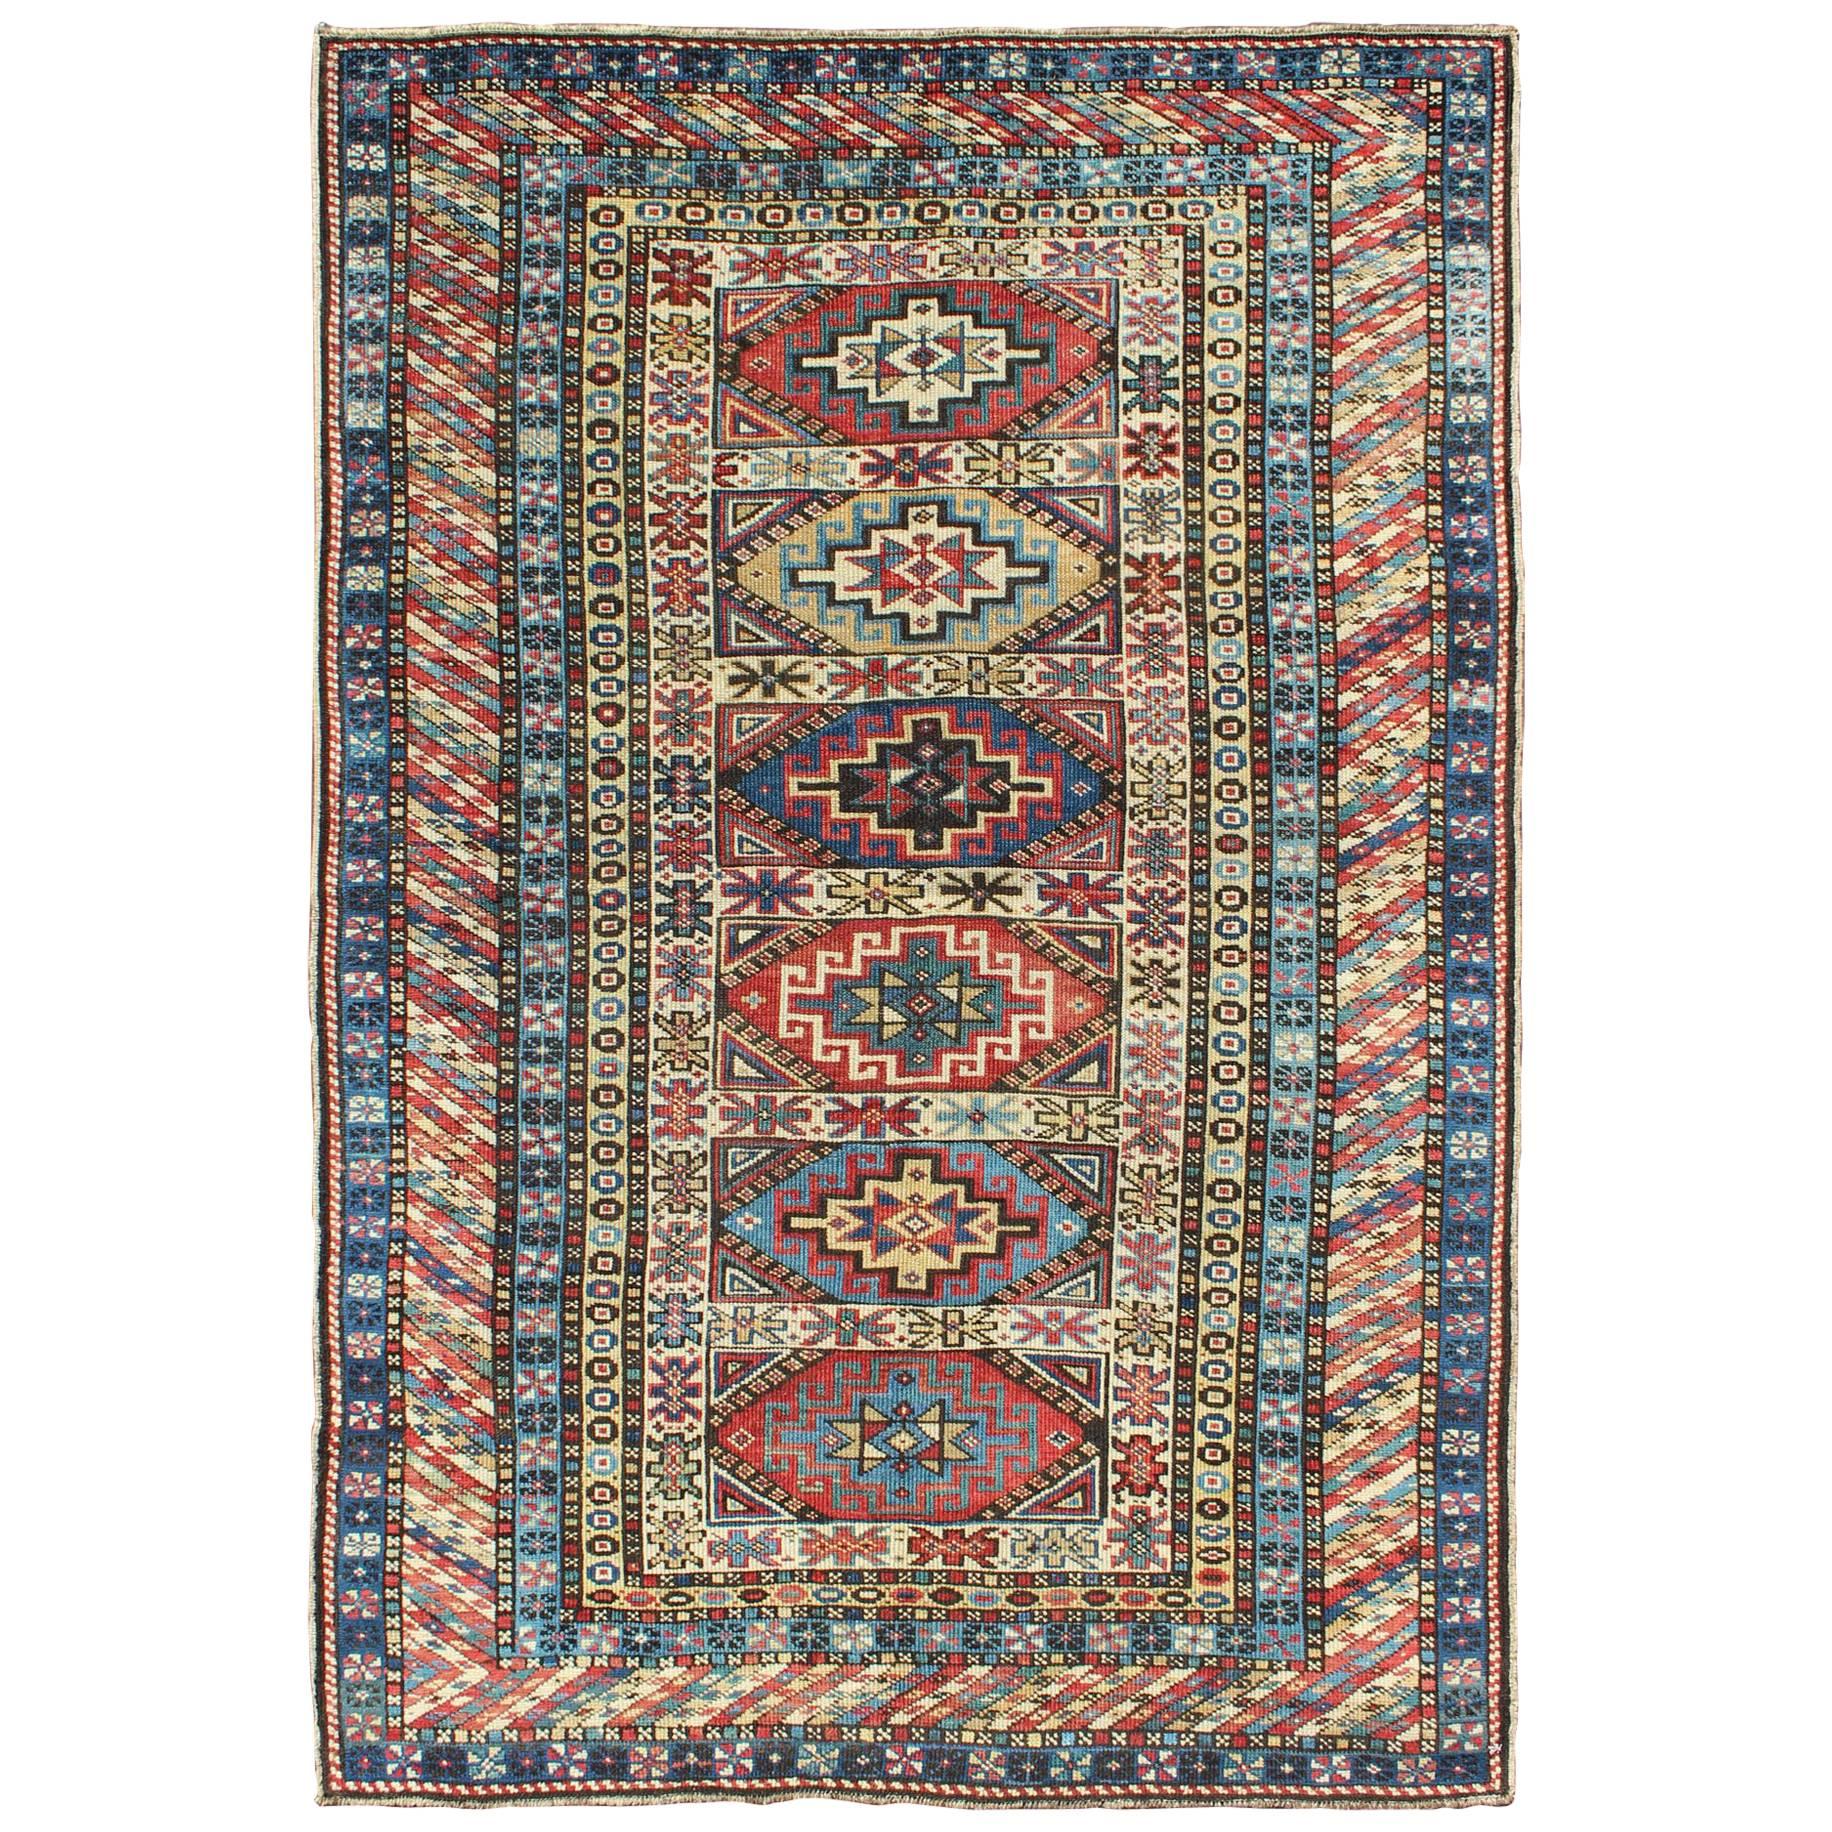 Antique Caucasian Rug with Six Central Medallions & Intricate Geometric Borders